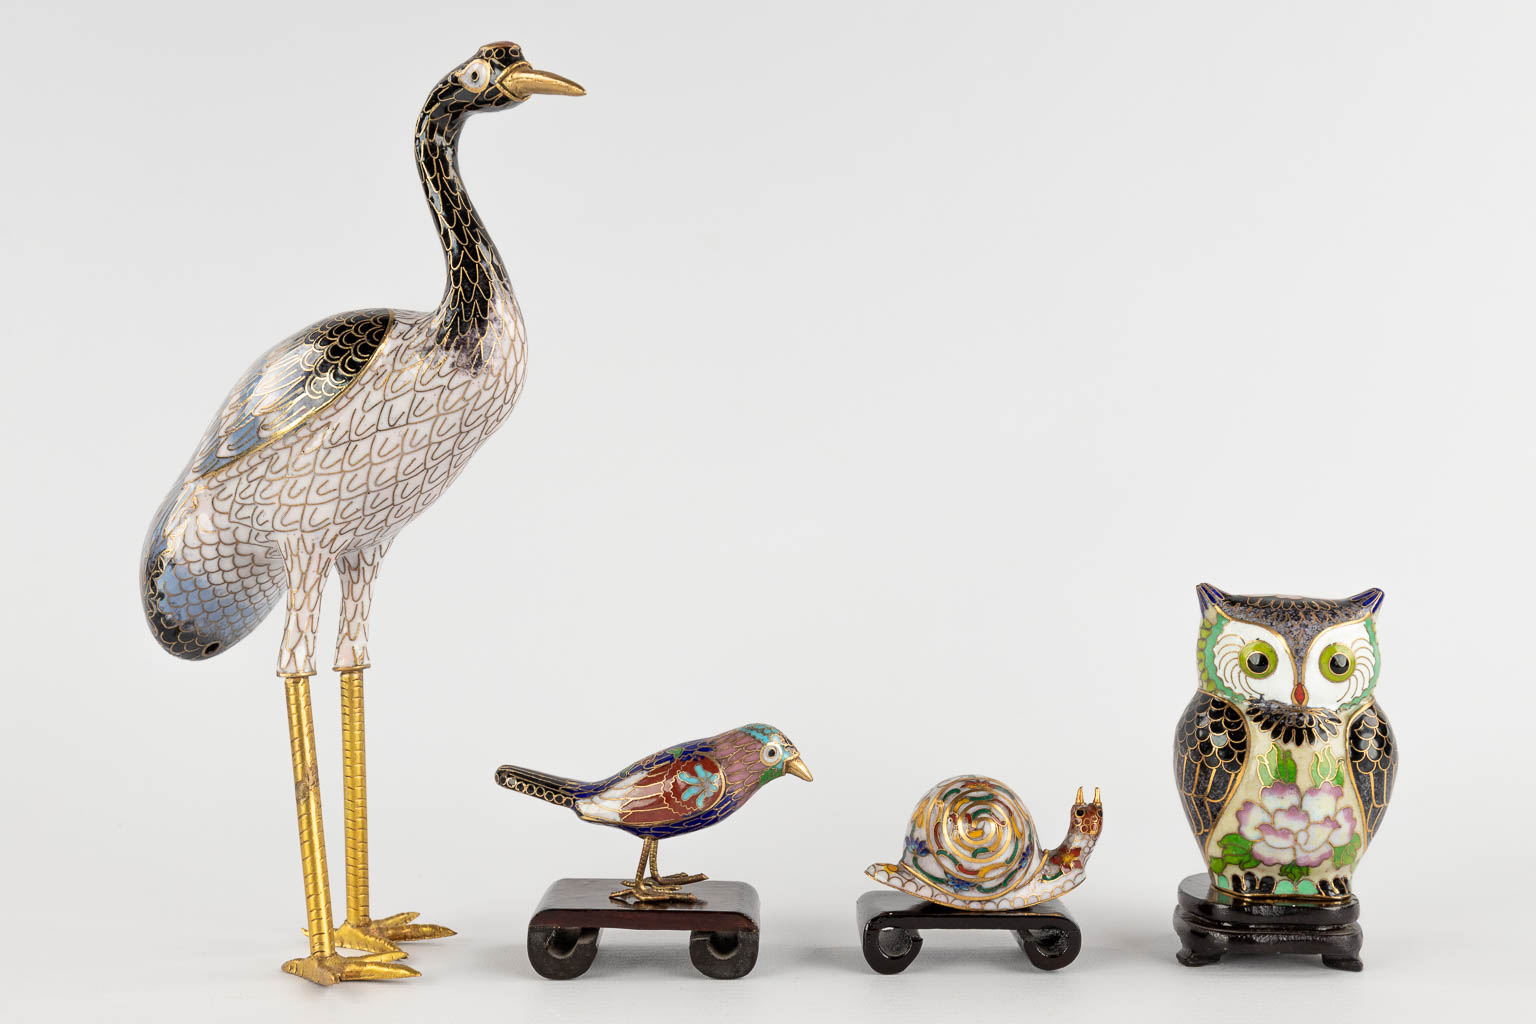 A large collection of 25 items and figurines, cloisonné bronze. 20th C. (H:23 cm)